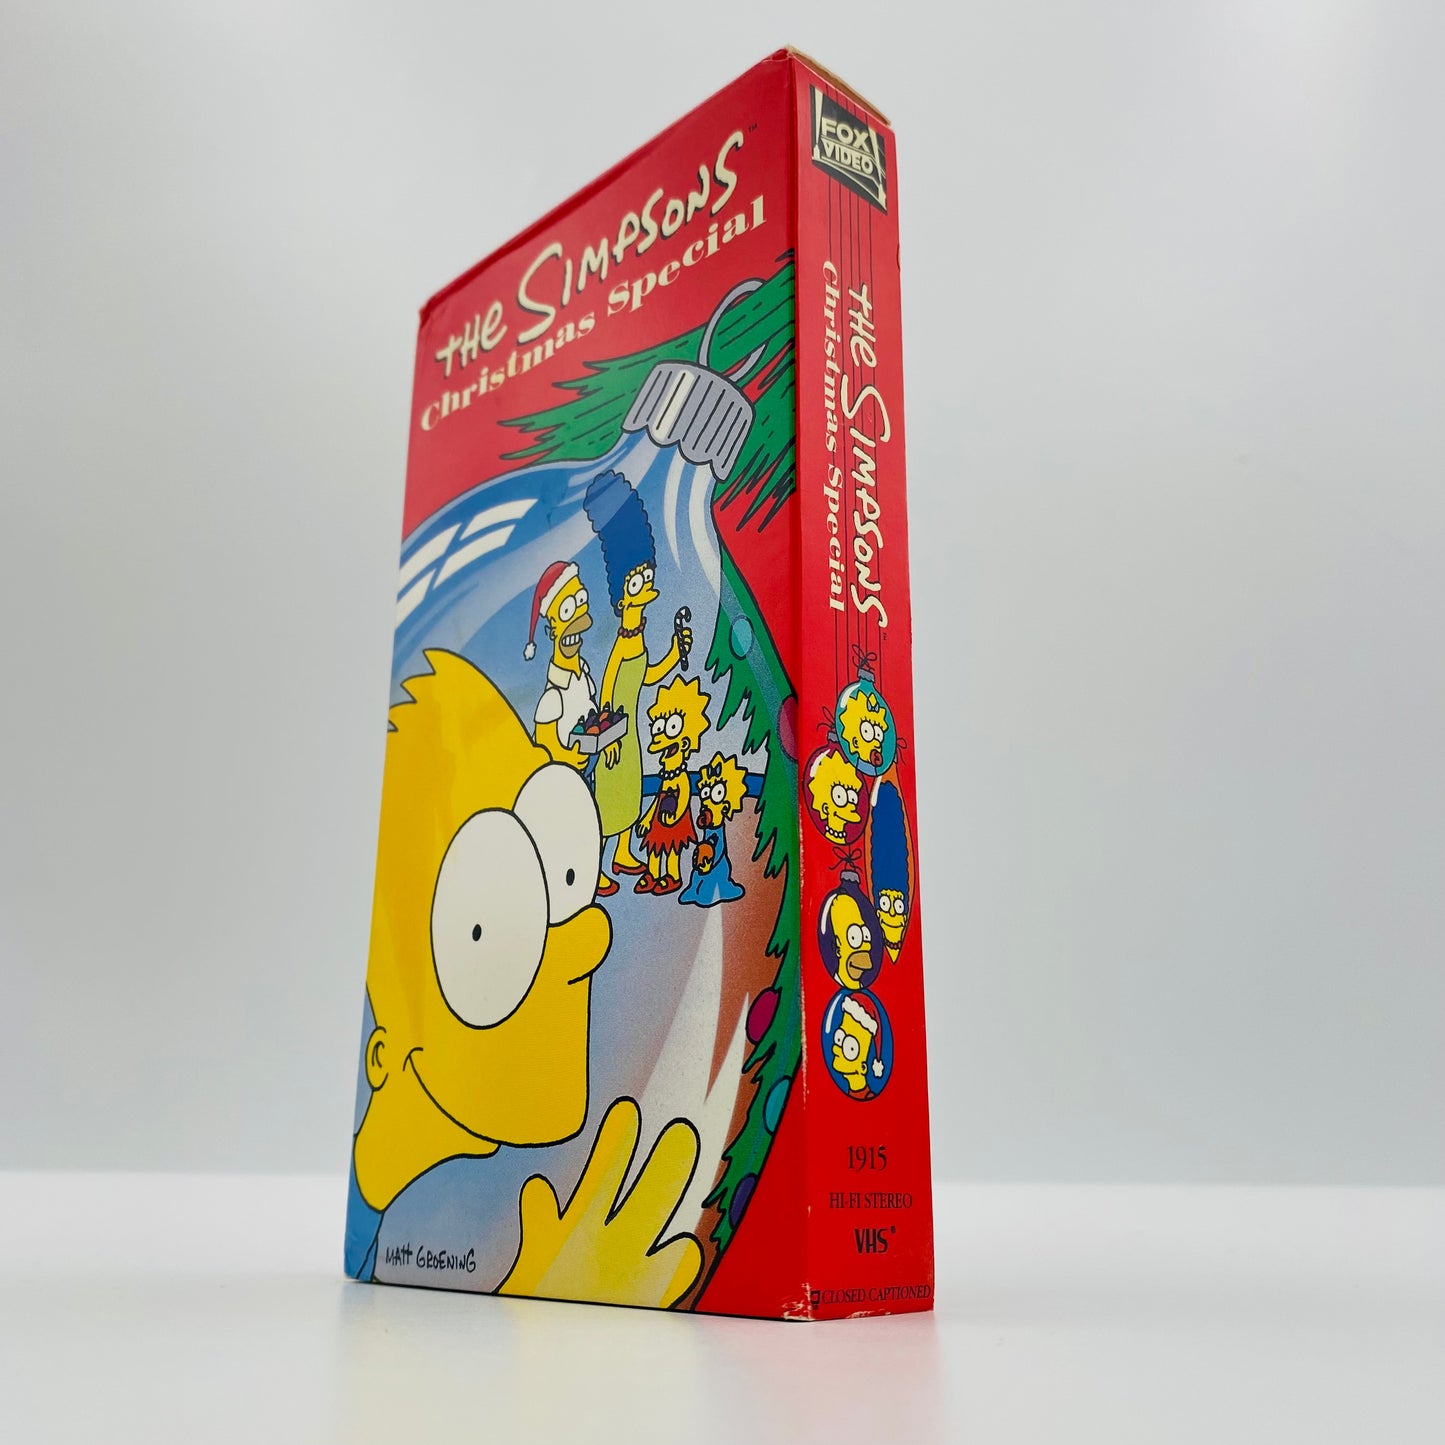 The Simpsons Christmas Special VHS tape (1991) Fox Video